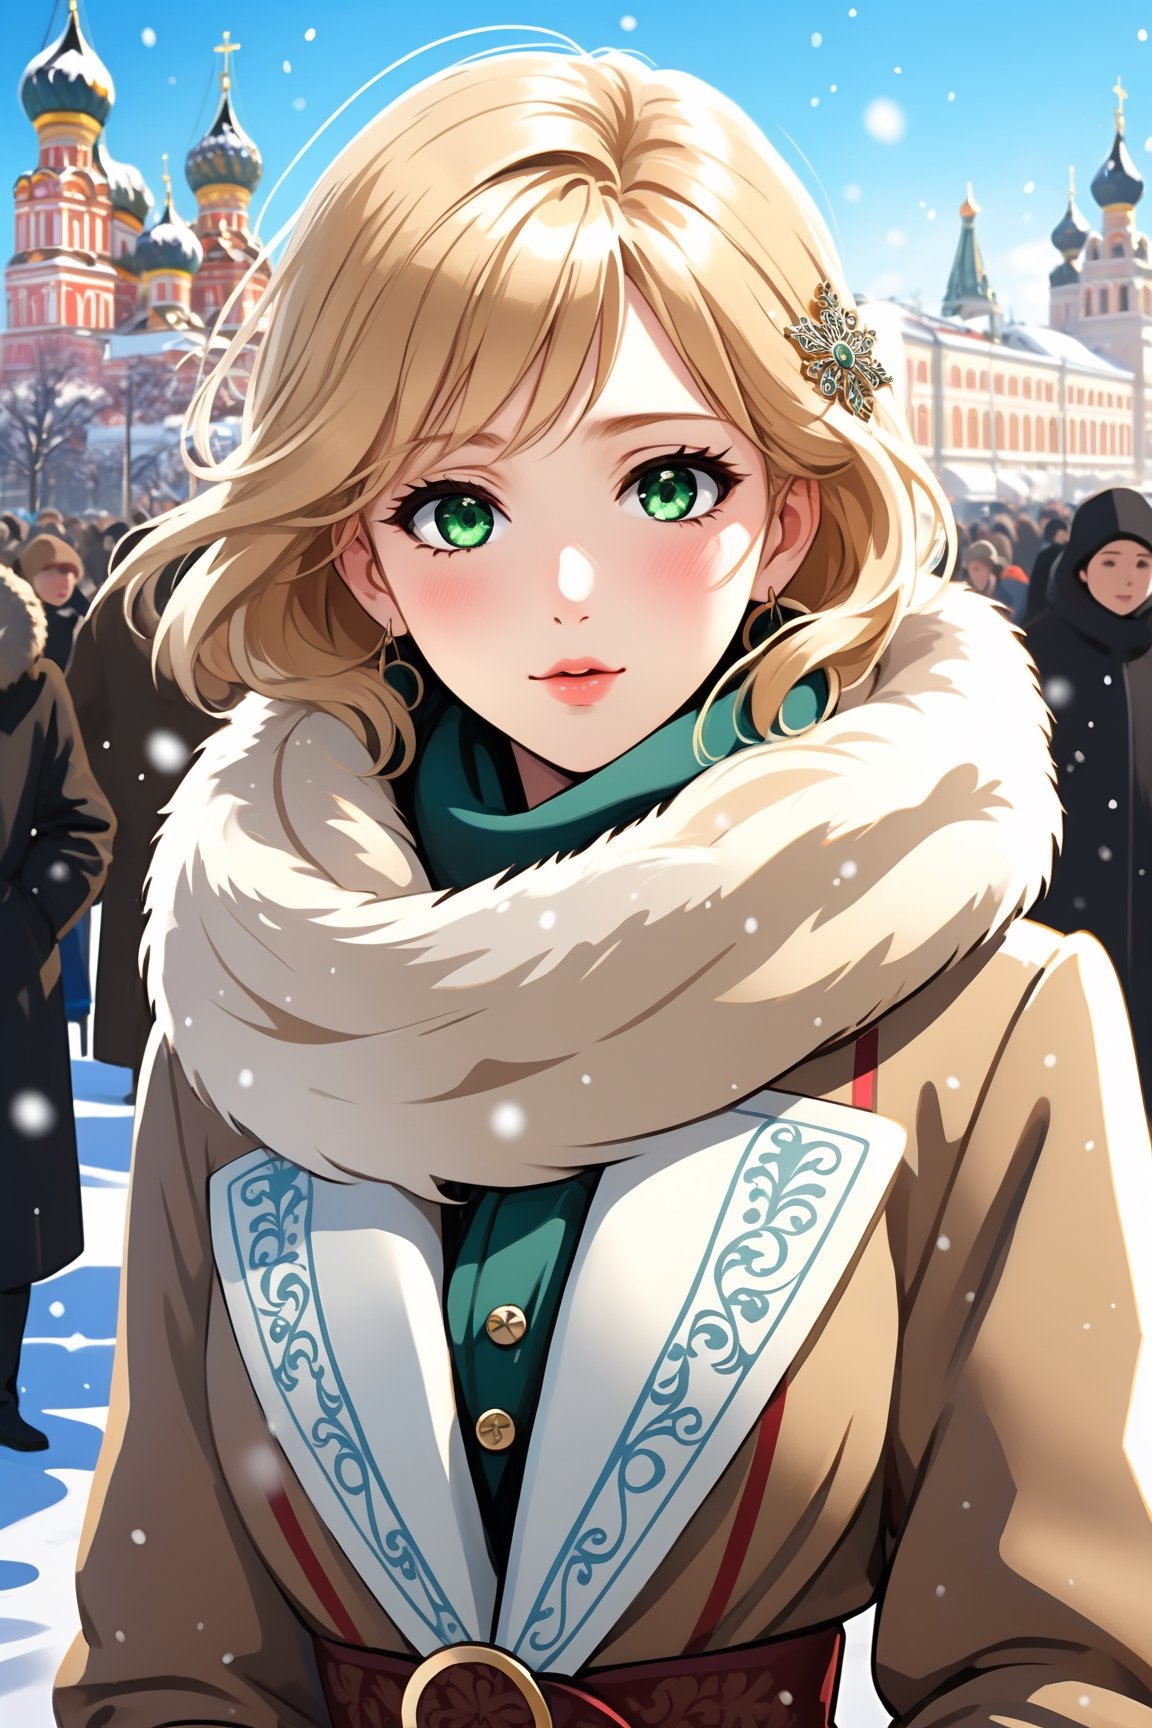 (a fancy russian woman), blonde, scarf, fur-trimmed_coat, (greeneyes), gloves, (lipstick:0.5),

 winter, blizzard, snow, icy, sky, sun, crowd, trade fair,

black / white / beige / grey / jade / cerulean, (outline), falling_snow,

(((Masterpiece, best quality), HDR, artstation anime), sharp visual, intricate details),

nature, (aesthetic), glamorous, elegant, orthodox, slavic,